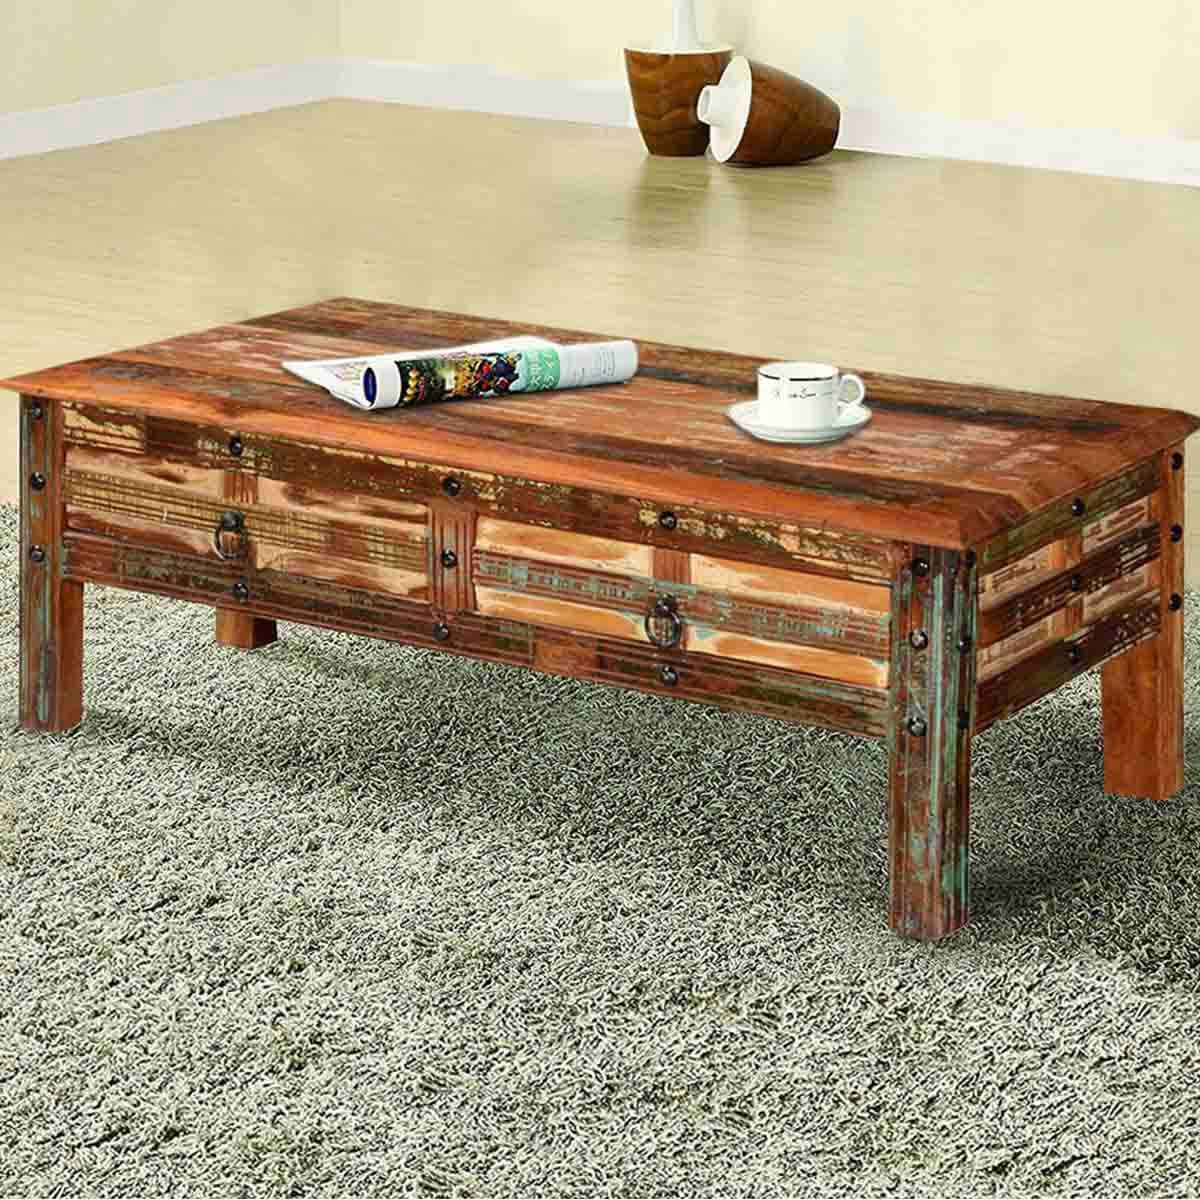 Rustic Light Wood Coffee Table – Canvas Broseph Inside Rustic Coffee Tables (Gallery 19 of 20)